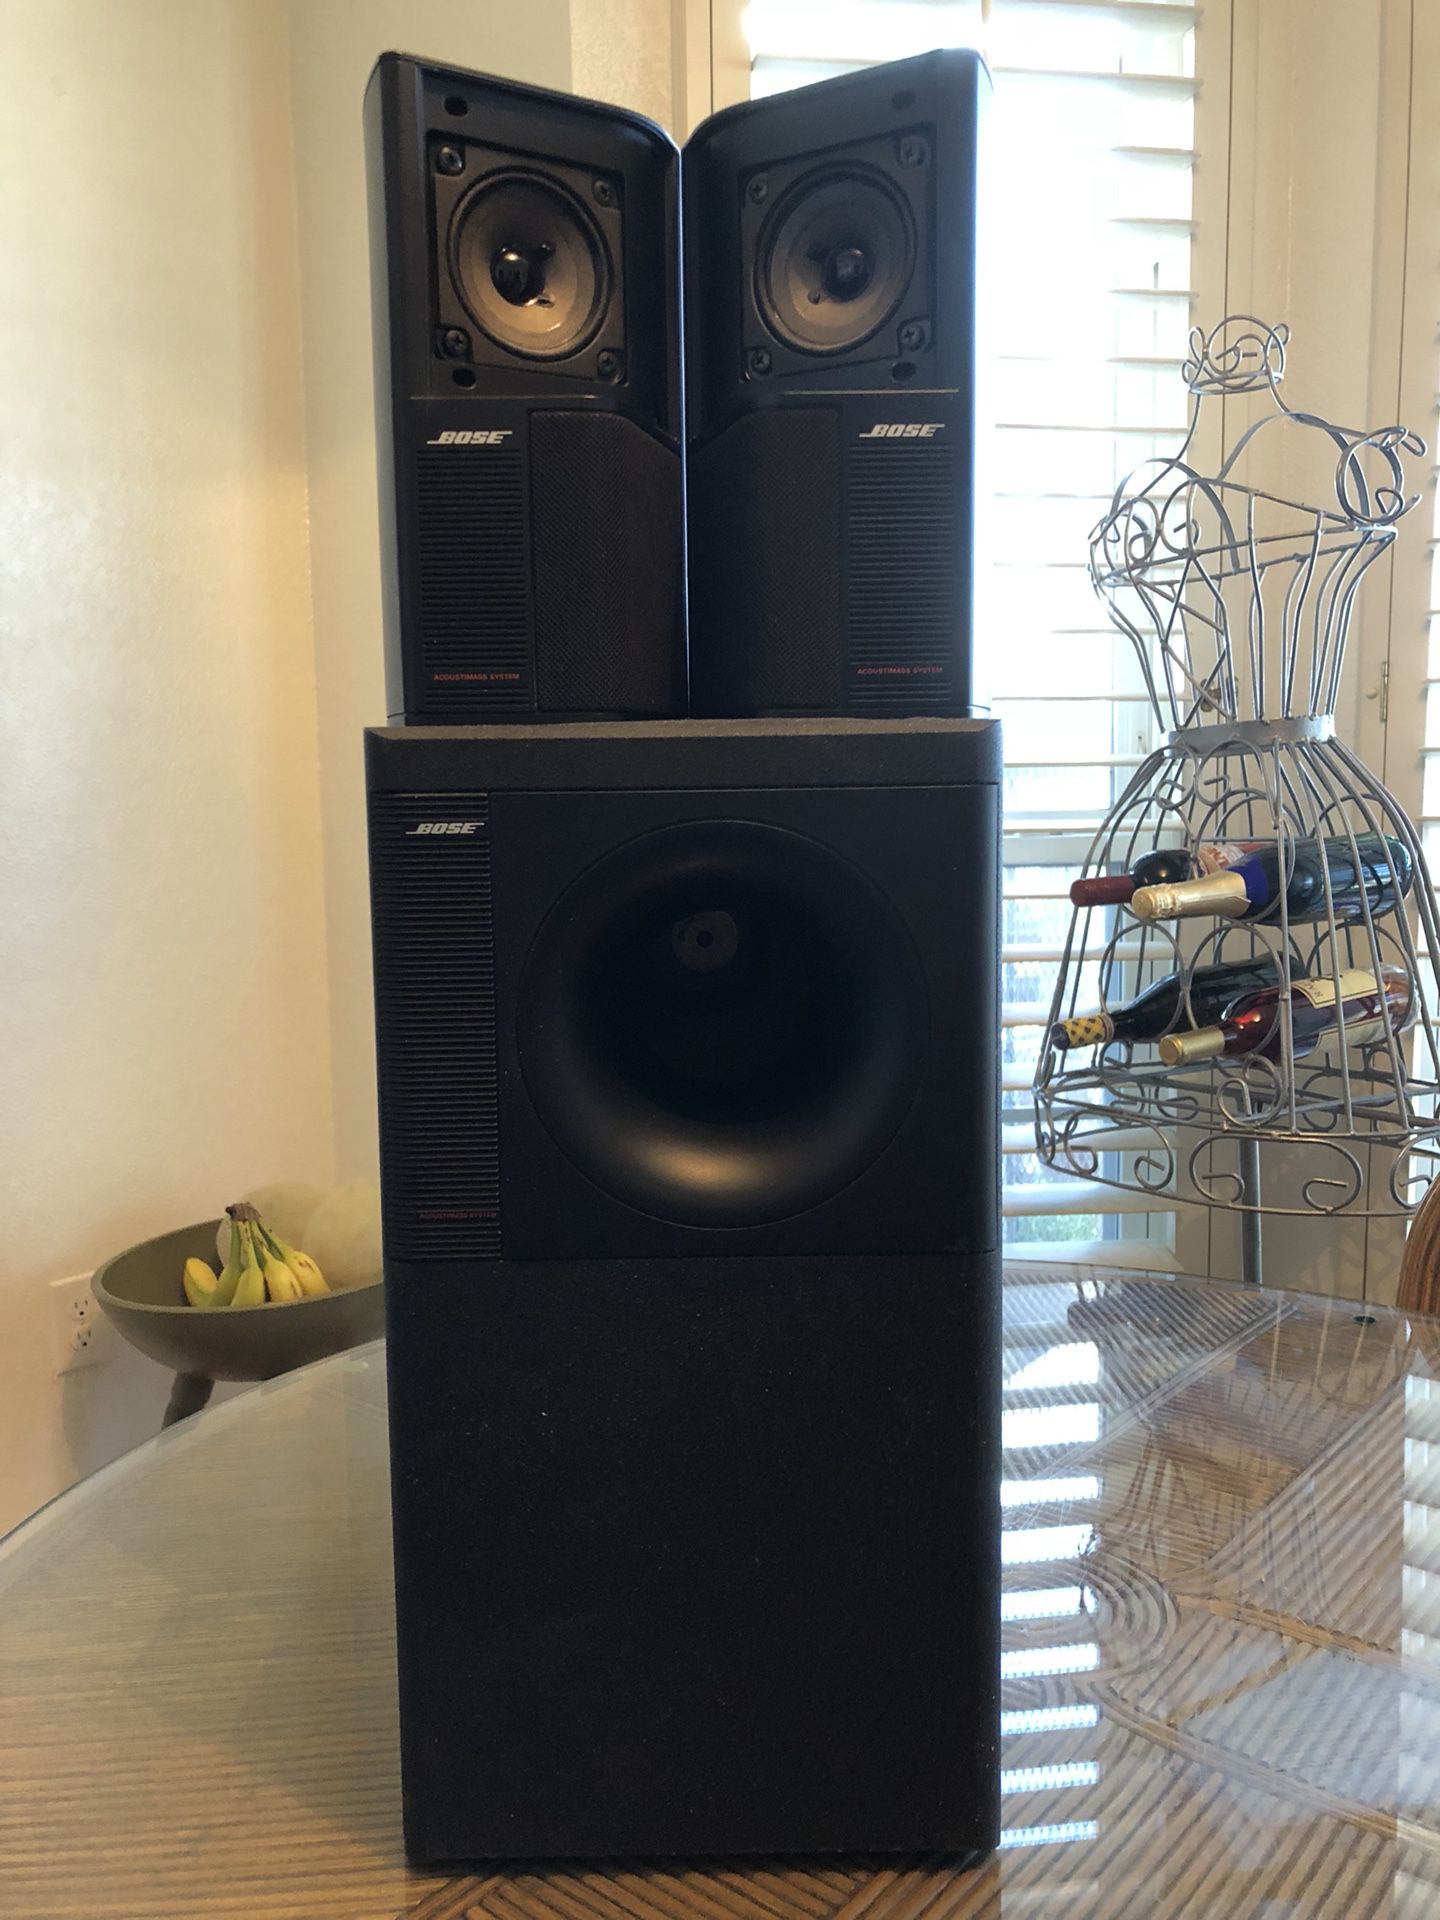 BOSE Acoustimass SE-5 Series II Direct/Reflecting 2 speaker system and Subwoofer - In Great Working Condition and Aesthetically BOSE! for Sale in El Paso, - OfferUp